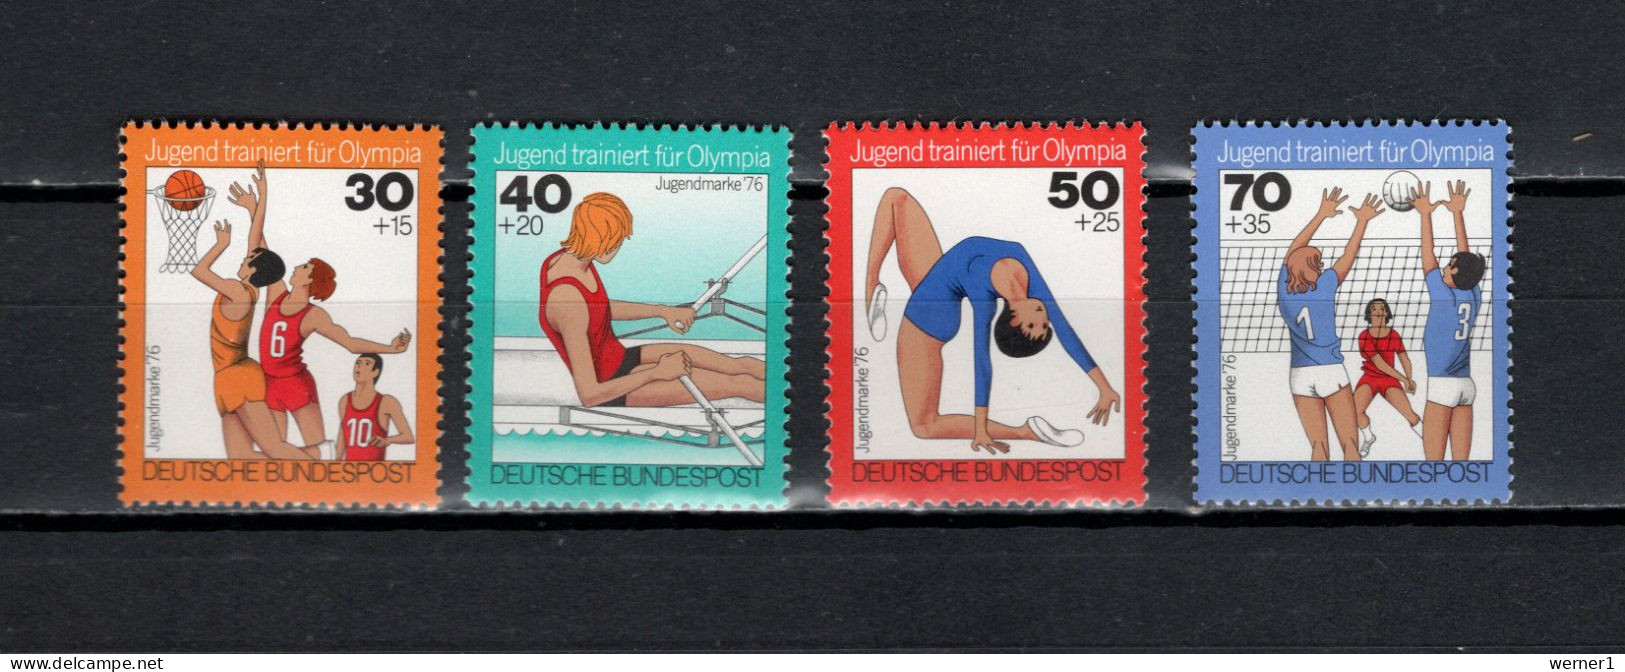 Germany 1976 Olympic Games, Sport, Basketball, Rowing, Gymnastics, Volleyball Set Of 4 MNH - Sommer 1976: Montreal